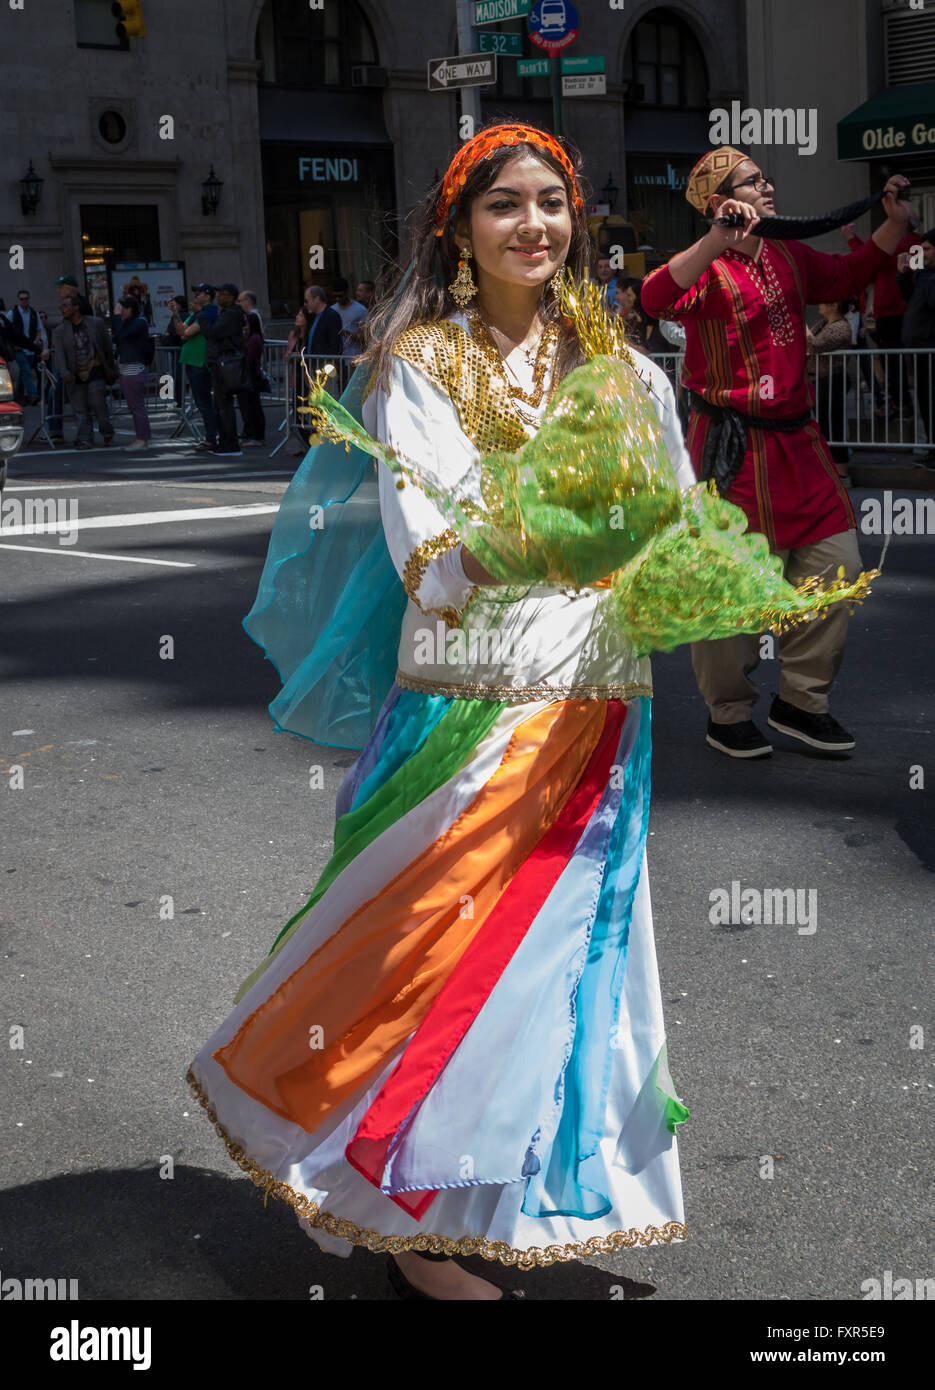 https://c8.alamy.com/comp/FXR5E9/young-woman-wearing-traditional-iranian-persian-dress-carrying-scarves-FXR5E9.jpg